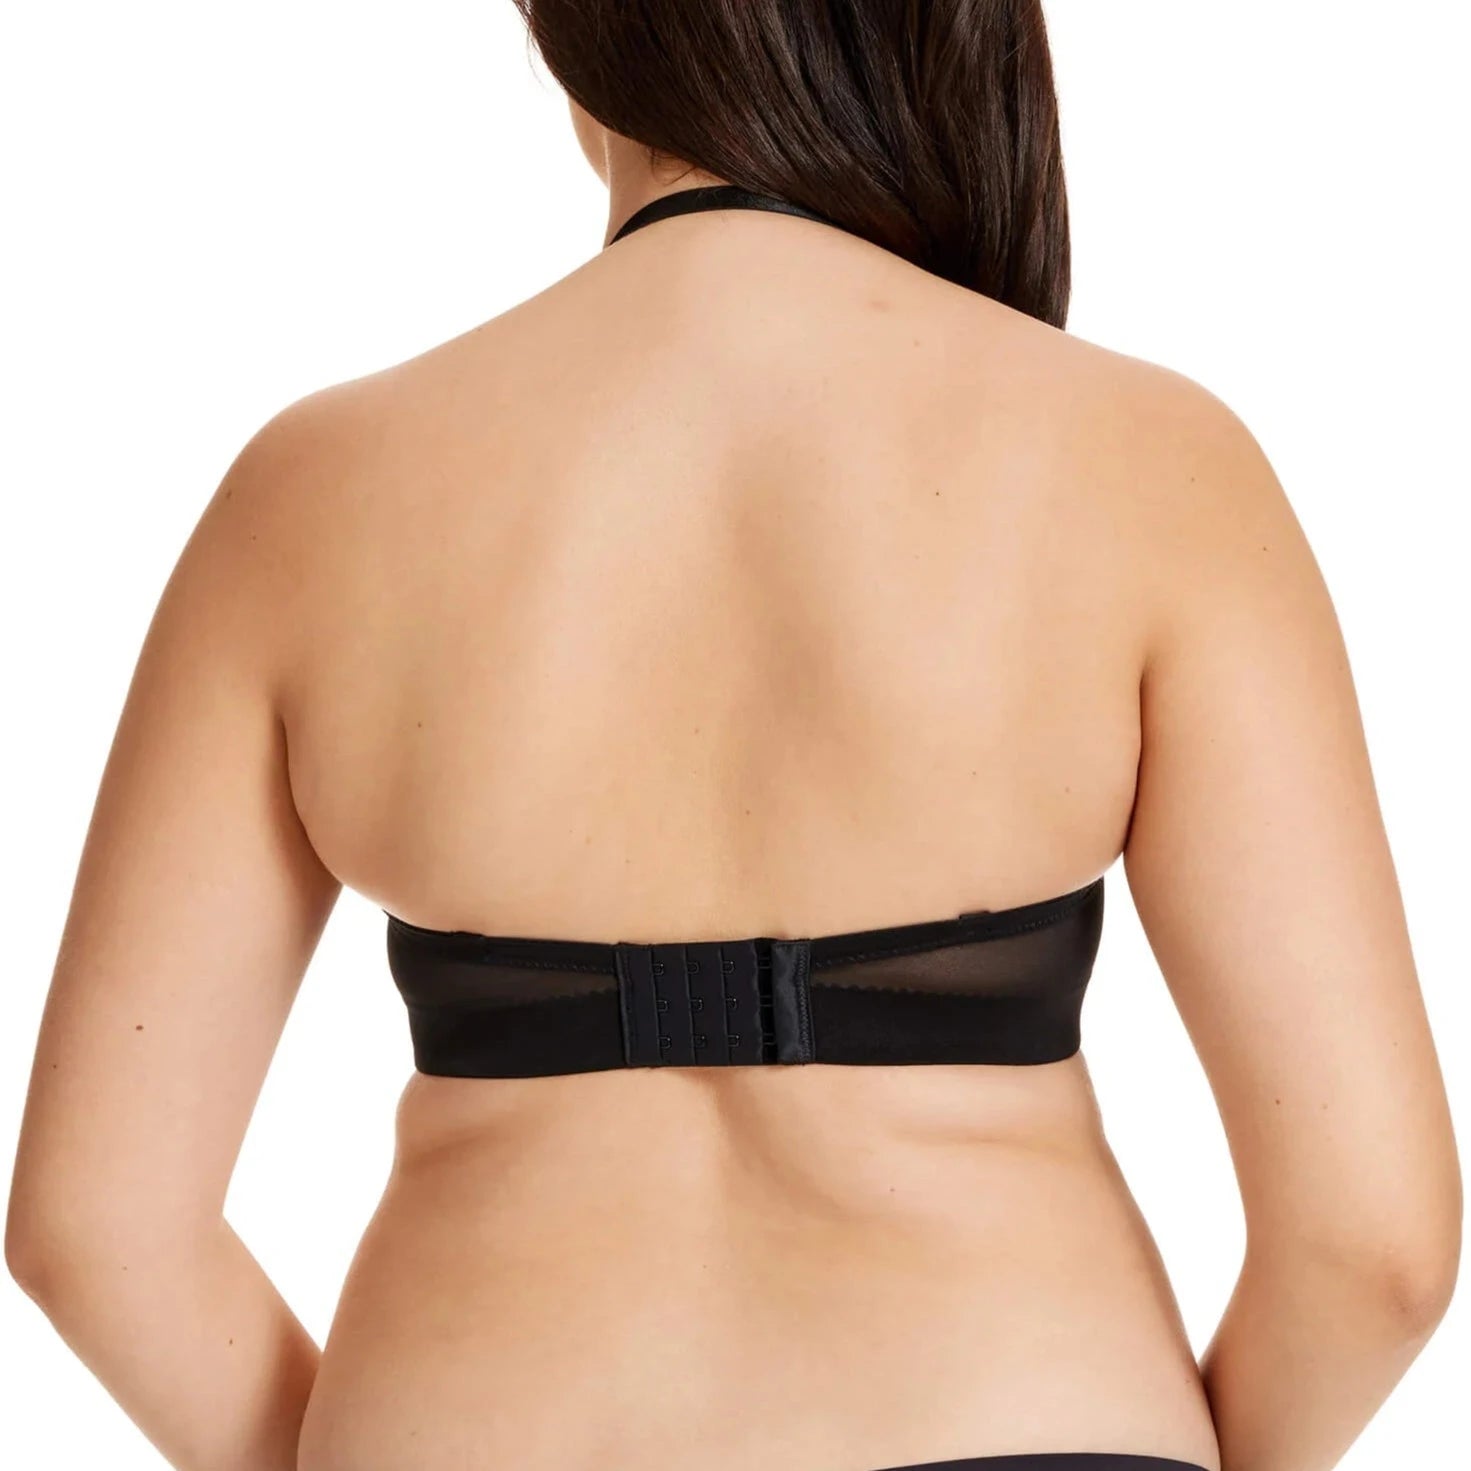 SPANX 989 Black XL Slimplicity Convertible Strapless Slip with straps